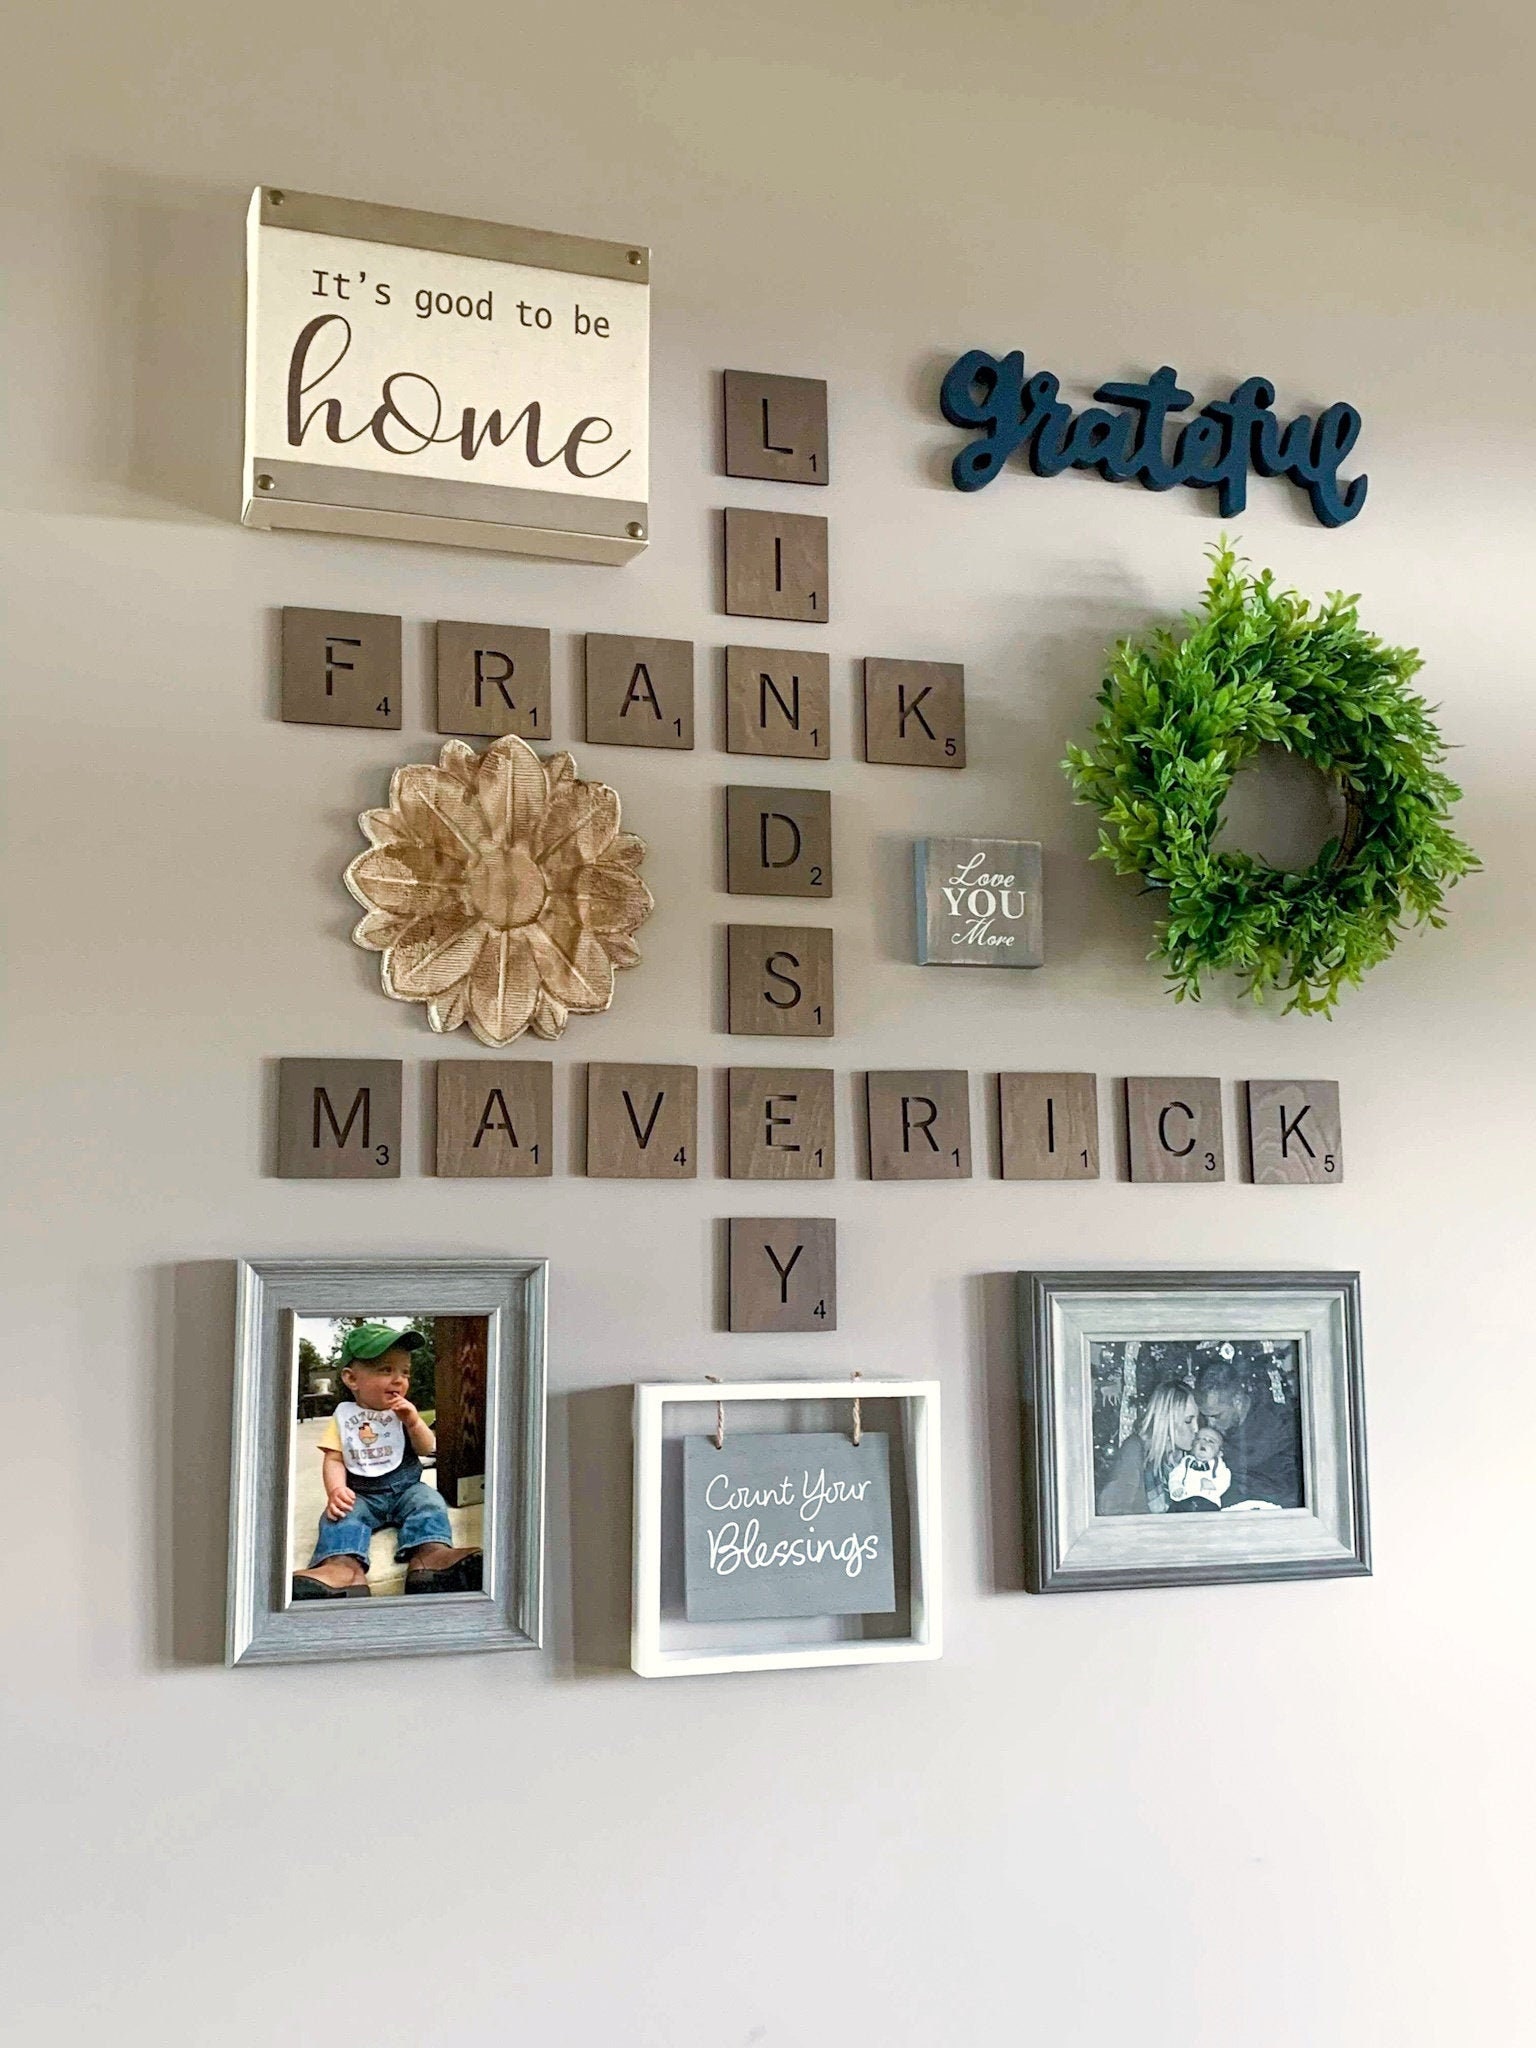 Scrabble Tiles Vinyl Sticker Letters Personalized Wall Decals for